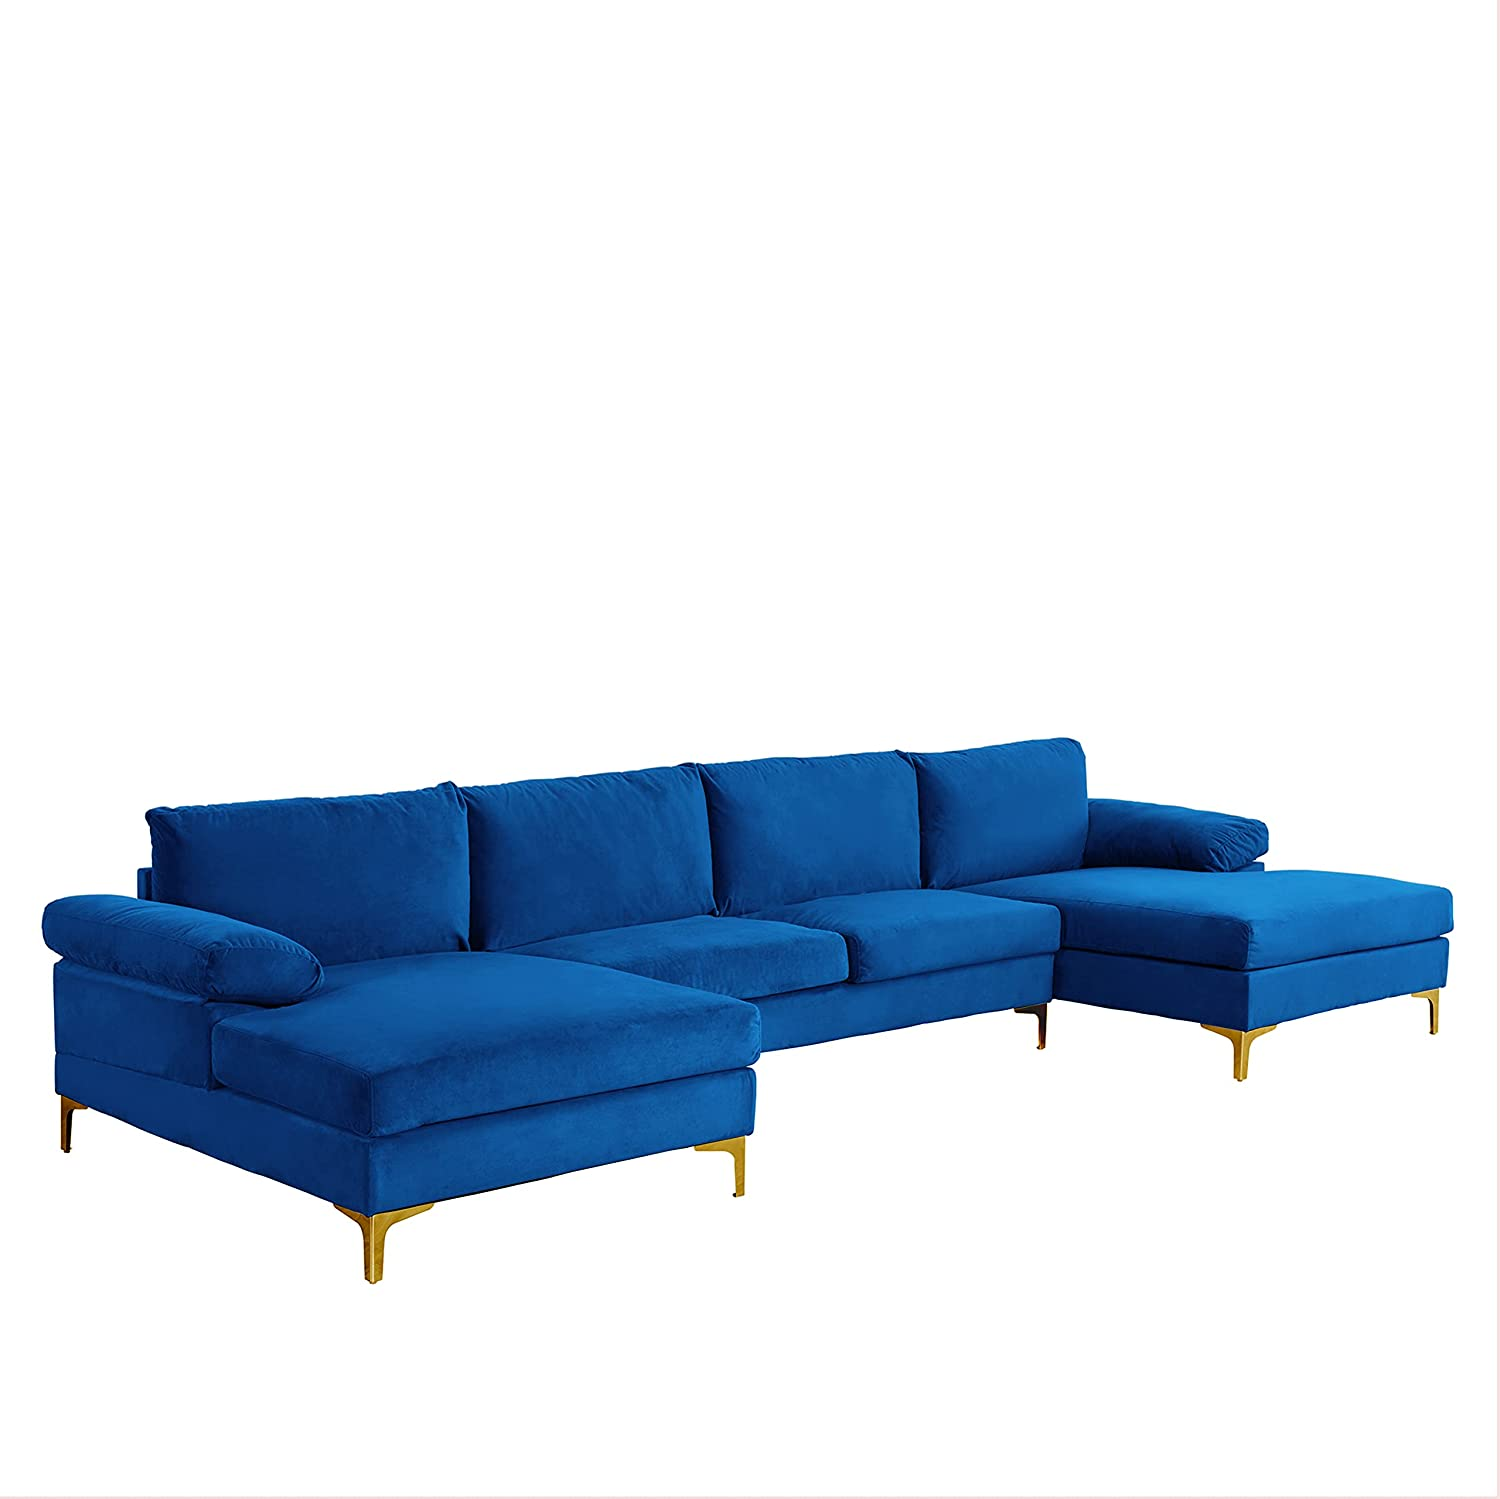 Modern Large Velvet Fabric Sectional Sofa Couch with Extra Wide Chaise Lounge with Golden Legs, U Shaped, Navy